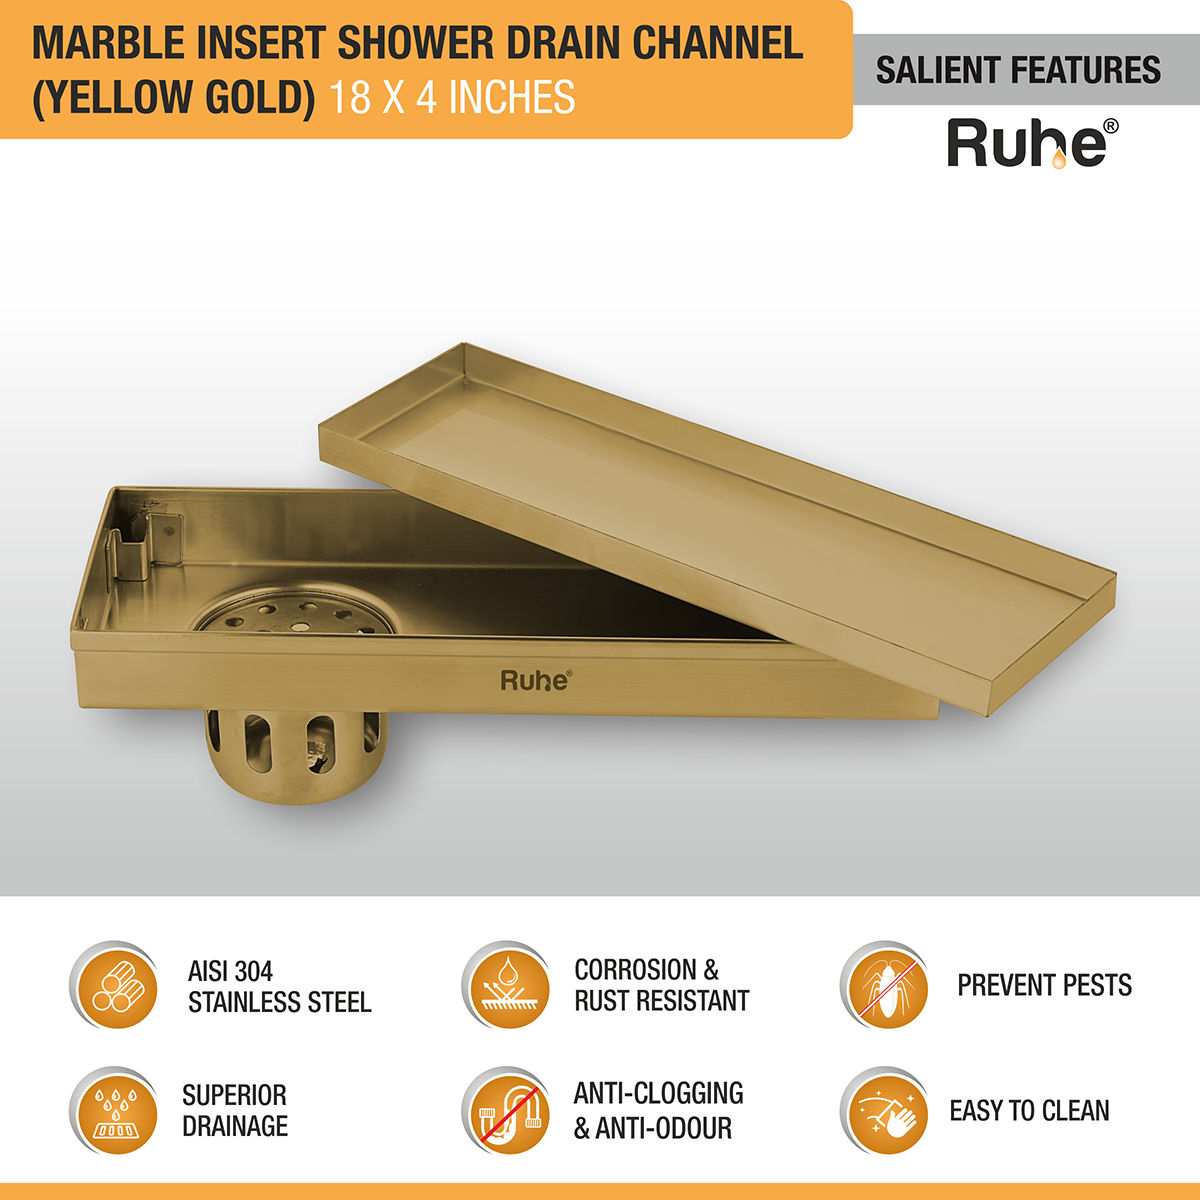 Marble Insert Shower Drain Channel (18 x 4 Inches) YELLOW GOLD PVD Coated features and benefits